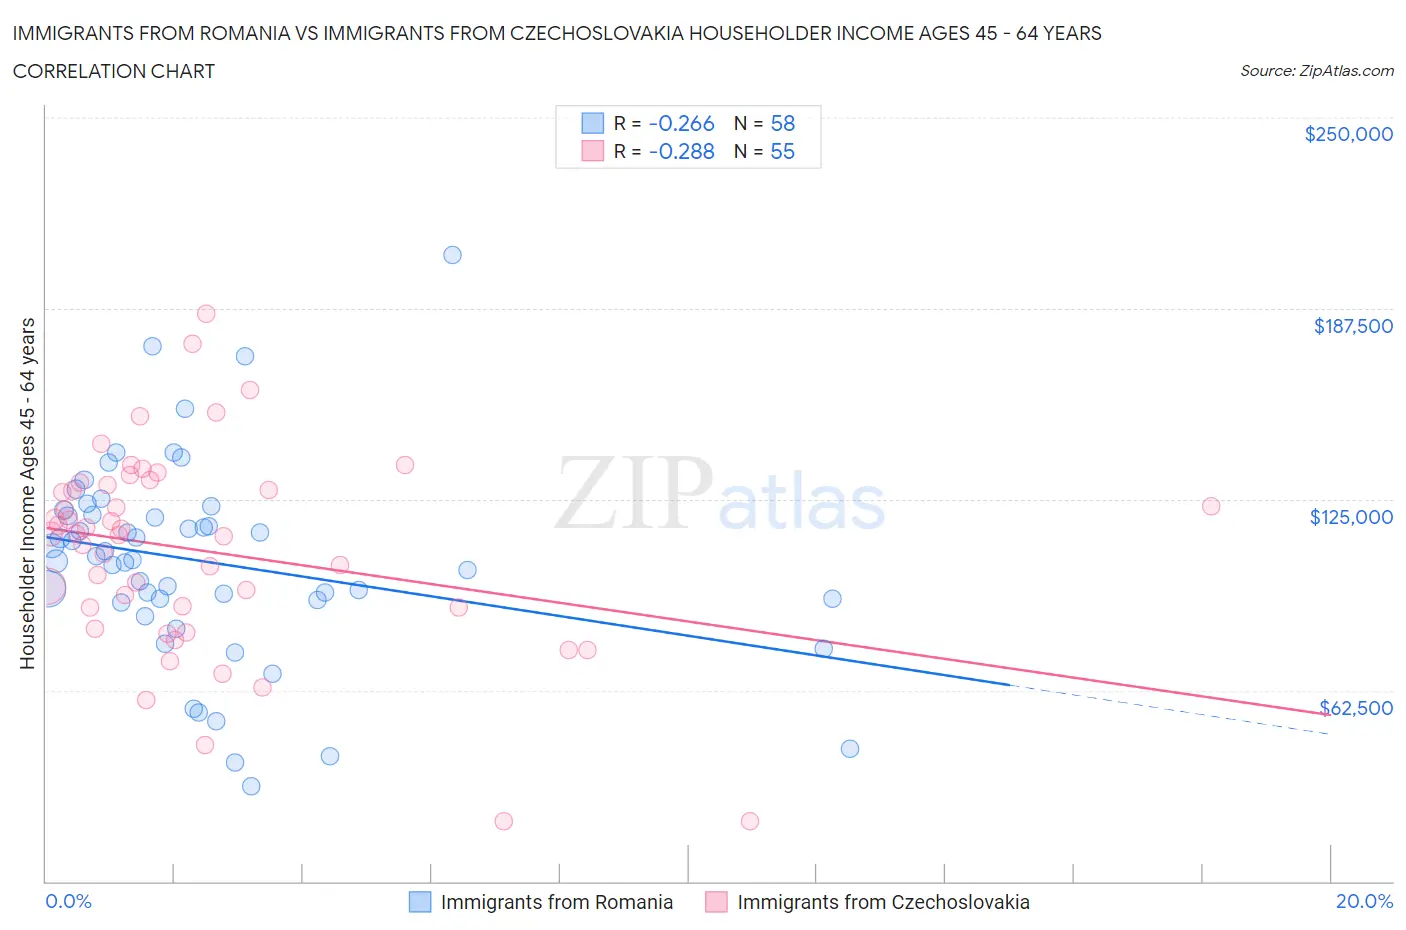 Immigrants from Romania vs Immigrants from Czechoslovakia Householder Income Ages 45 - 64 years